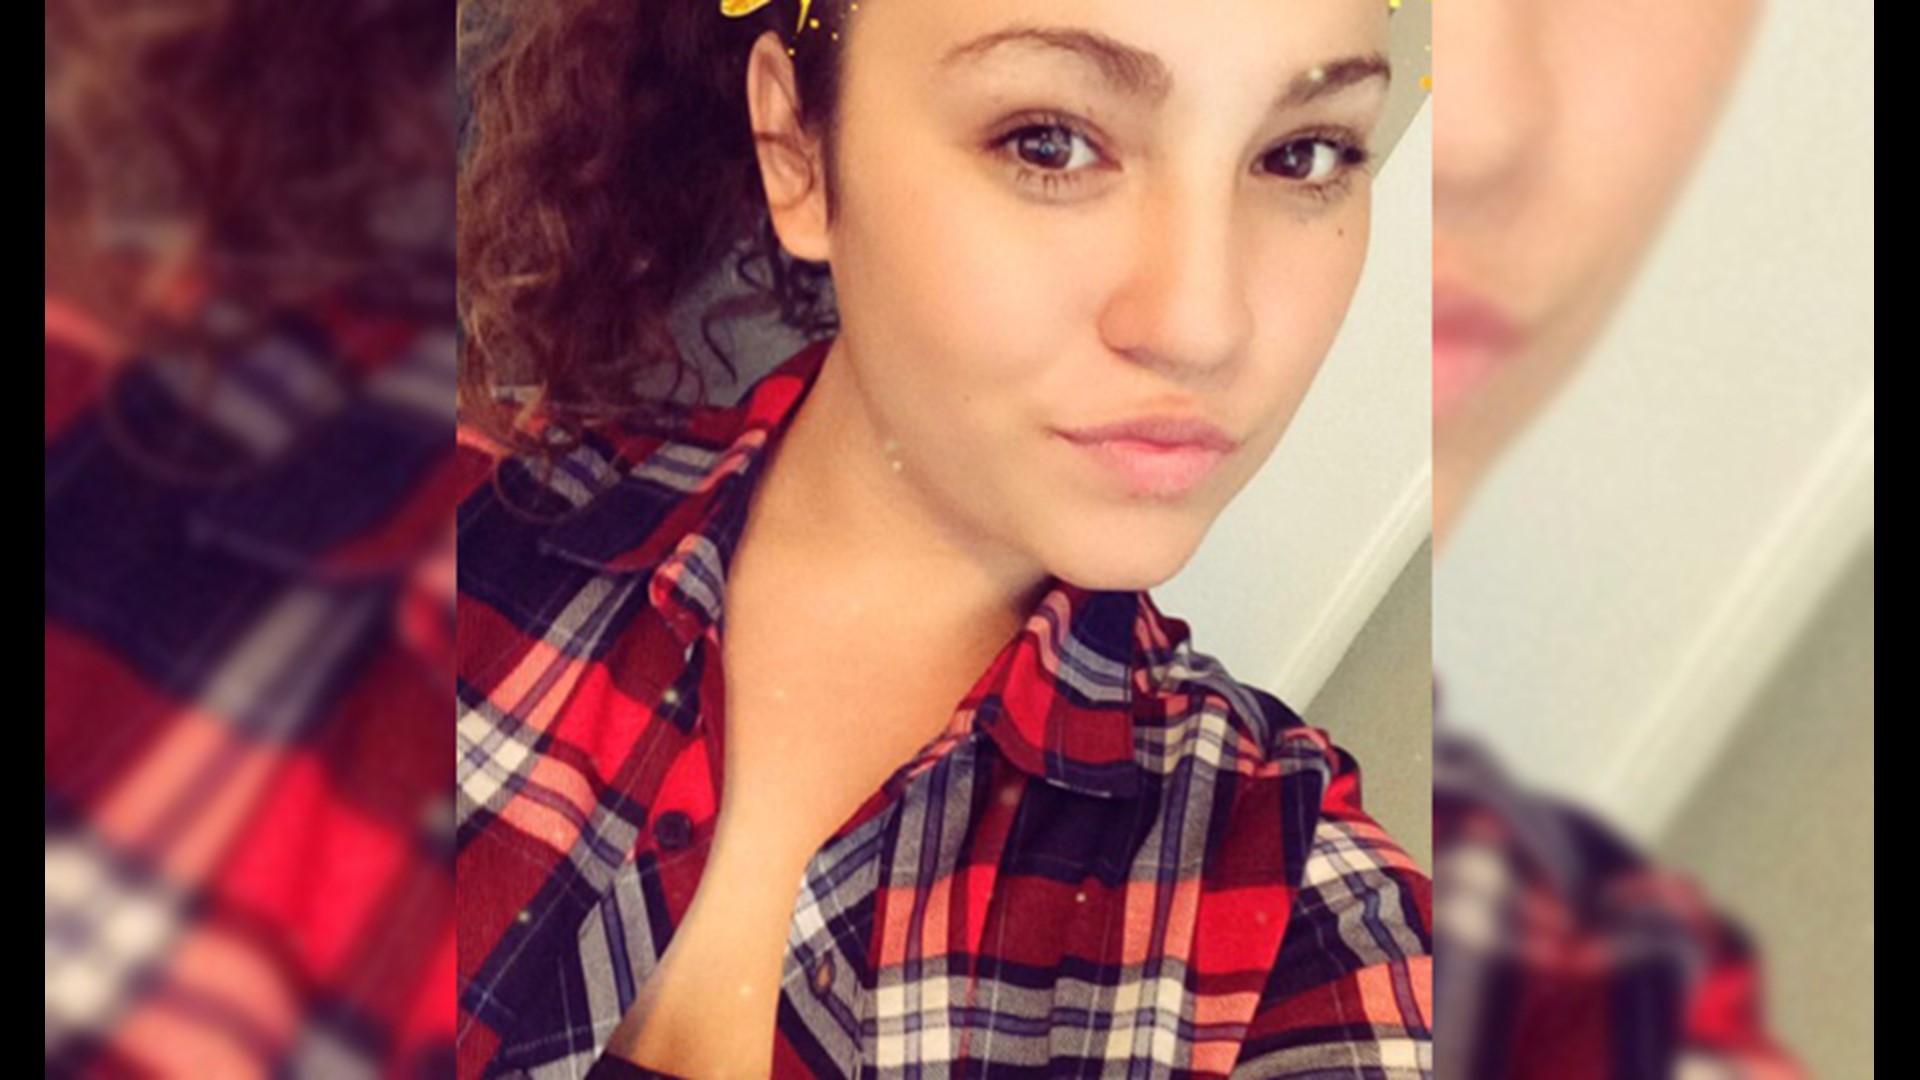 Police Looking For Missing 17 Year Old Girl In Franklin County